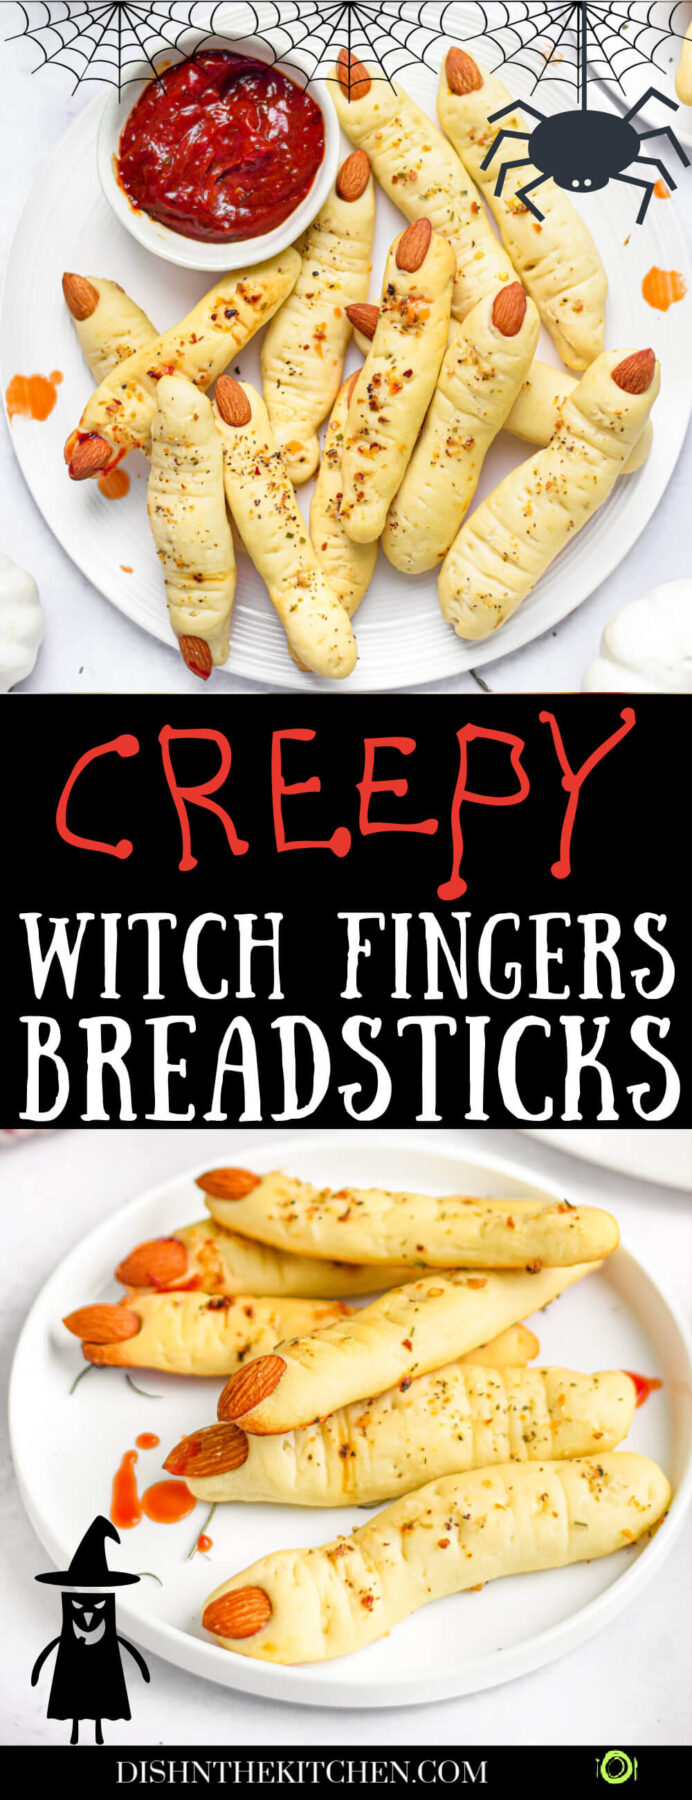 Pinterest image showing two white plates containing many creepy witch finger Italian breadsticks with a small bowl of marinara sauce for dipping nearby.